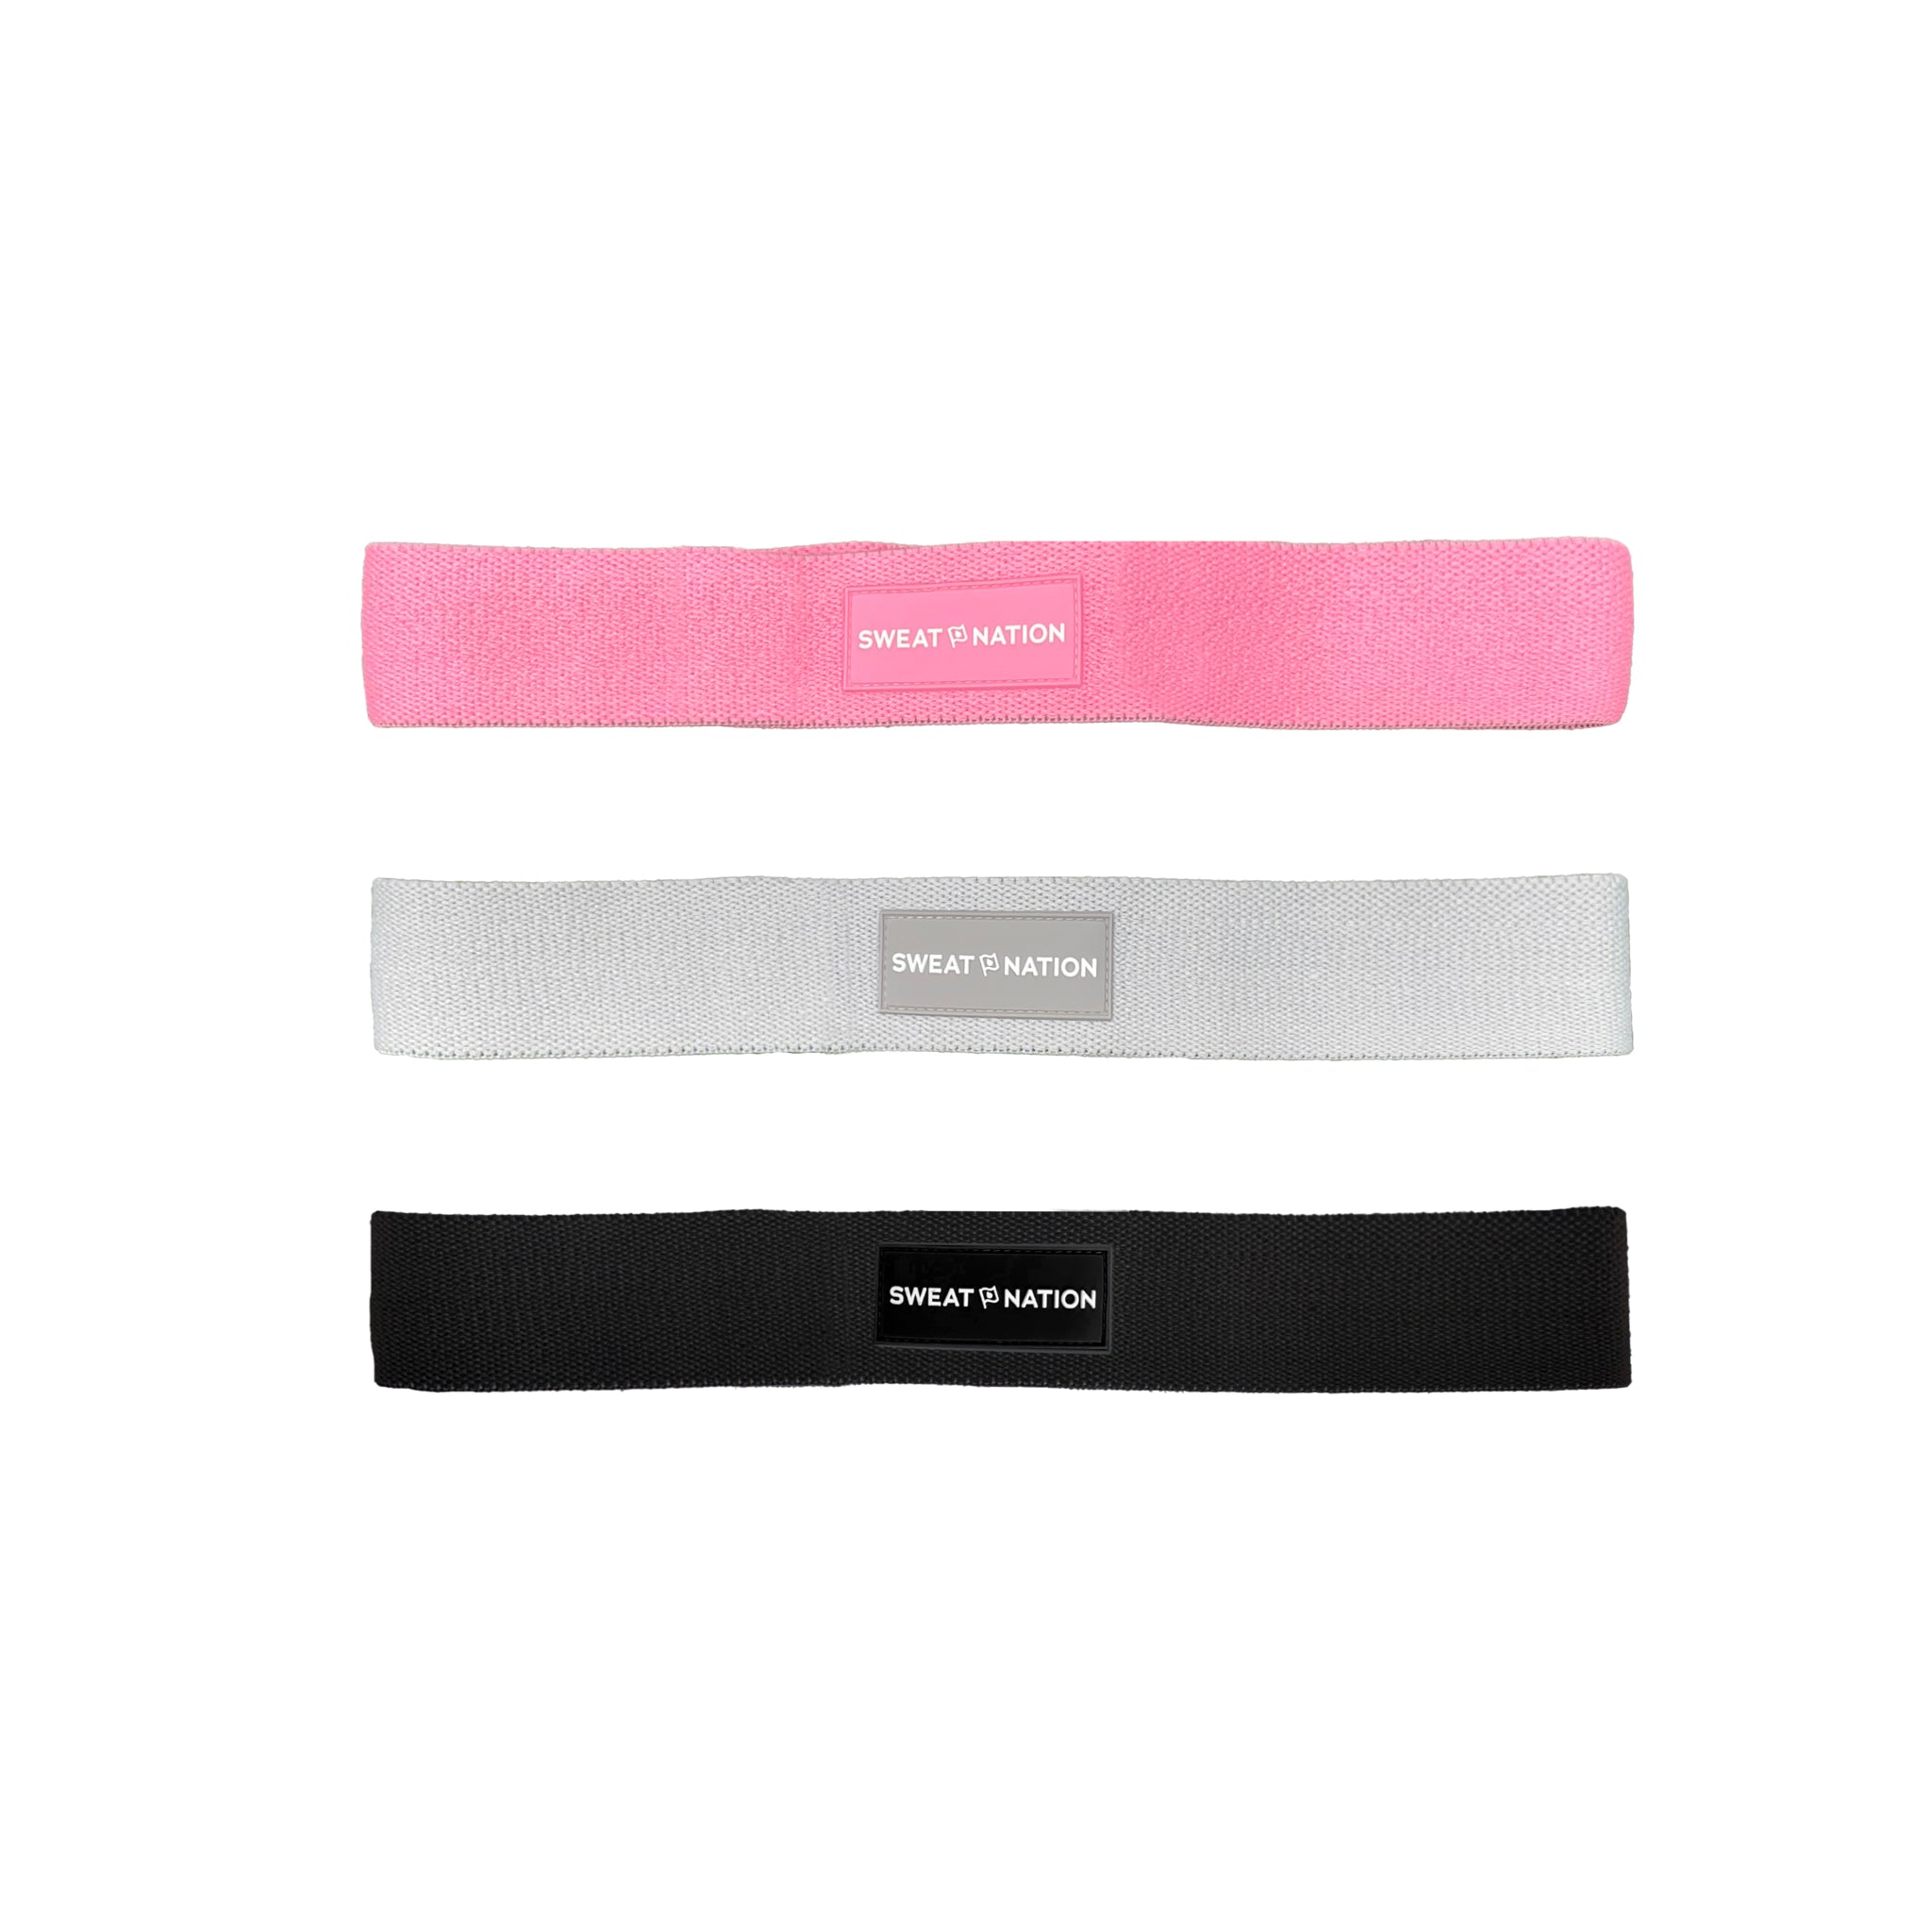 Fabric Resistance Bands for Working Out - Booty Bands for Women and Men